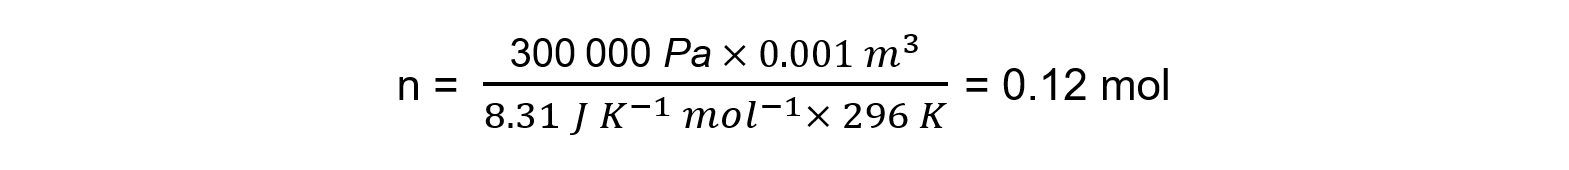 AQA-1.3.4-Worked-Example-2-1